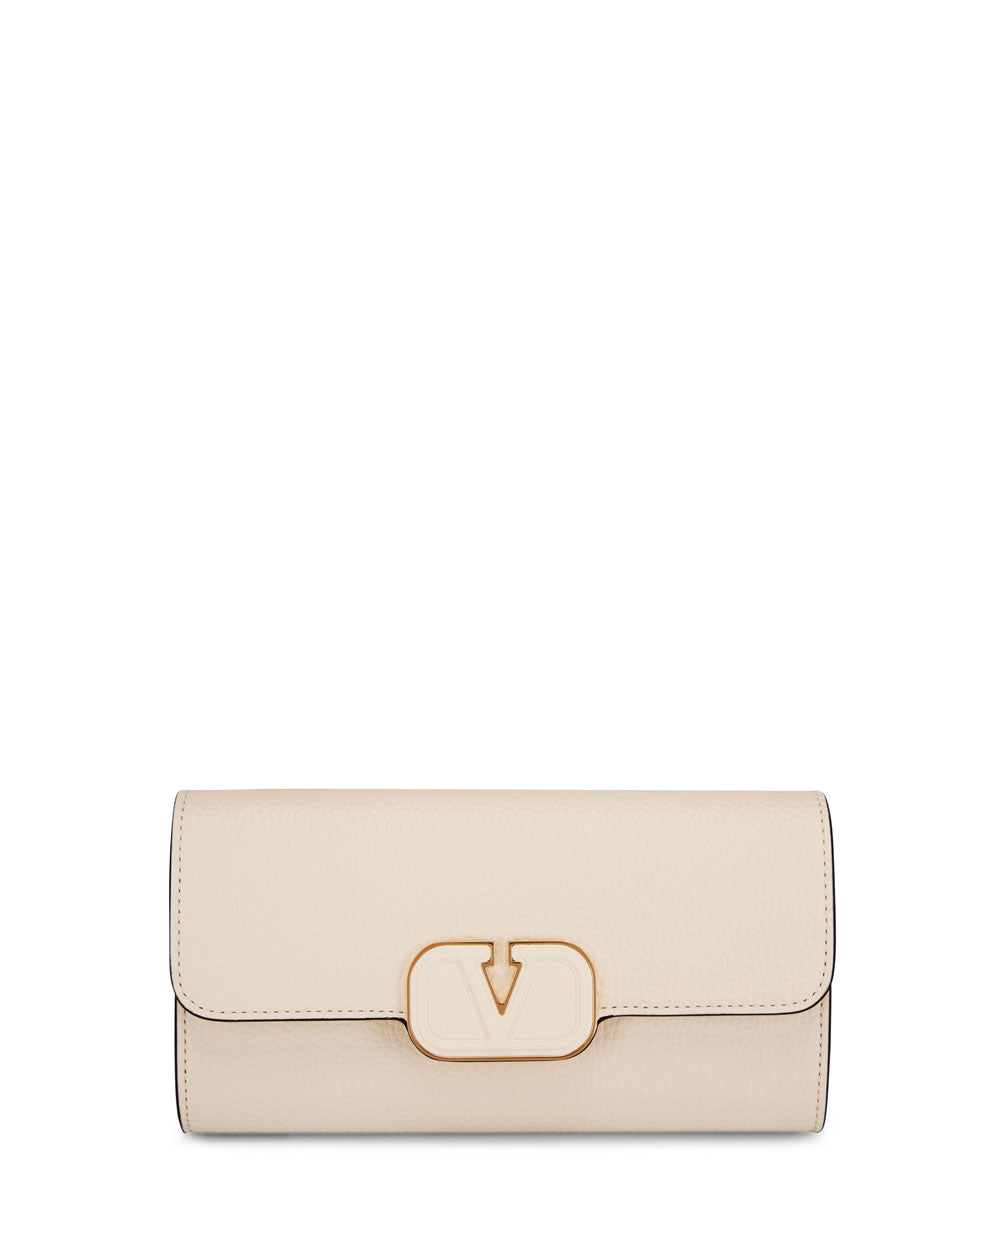 Vlogo Wallet on a Chain in Ivory